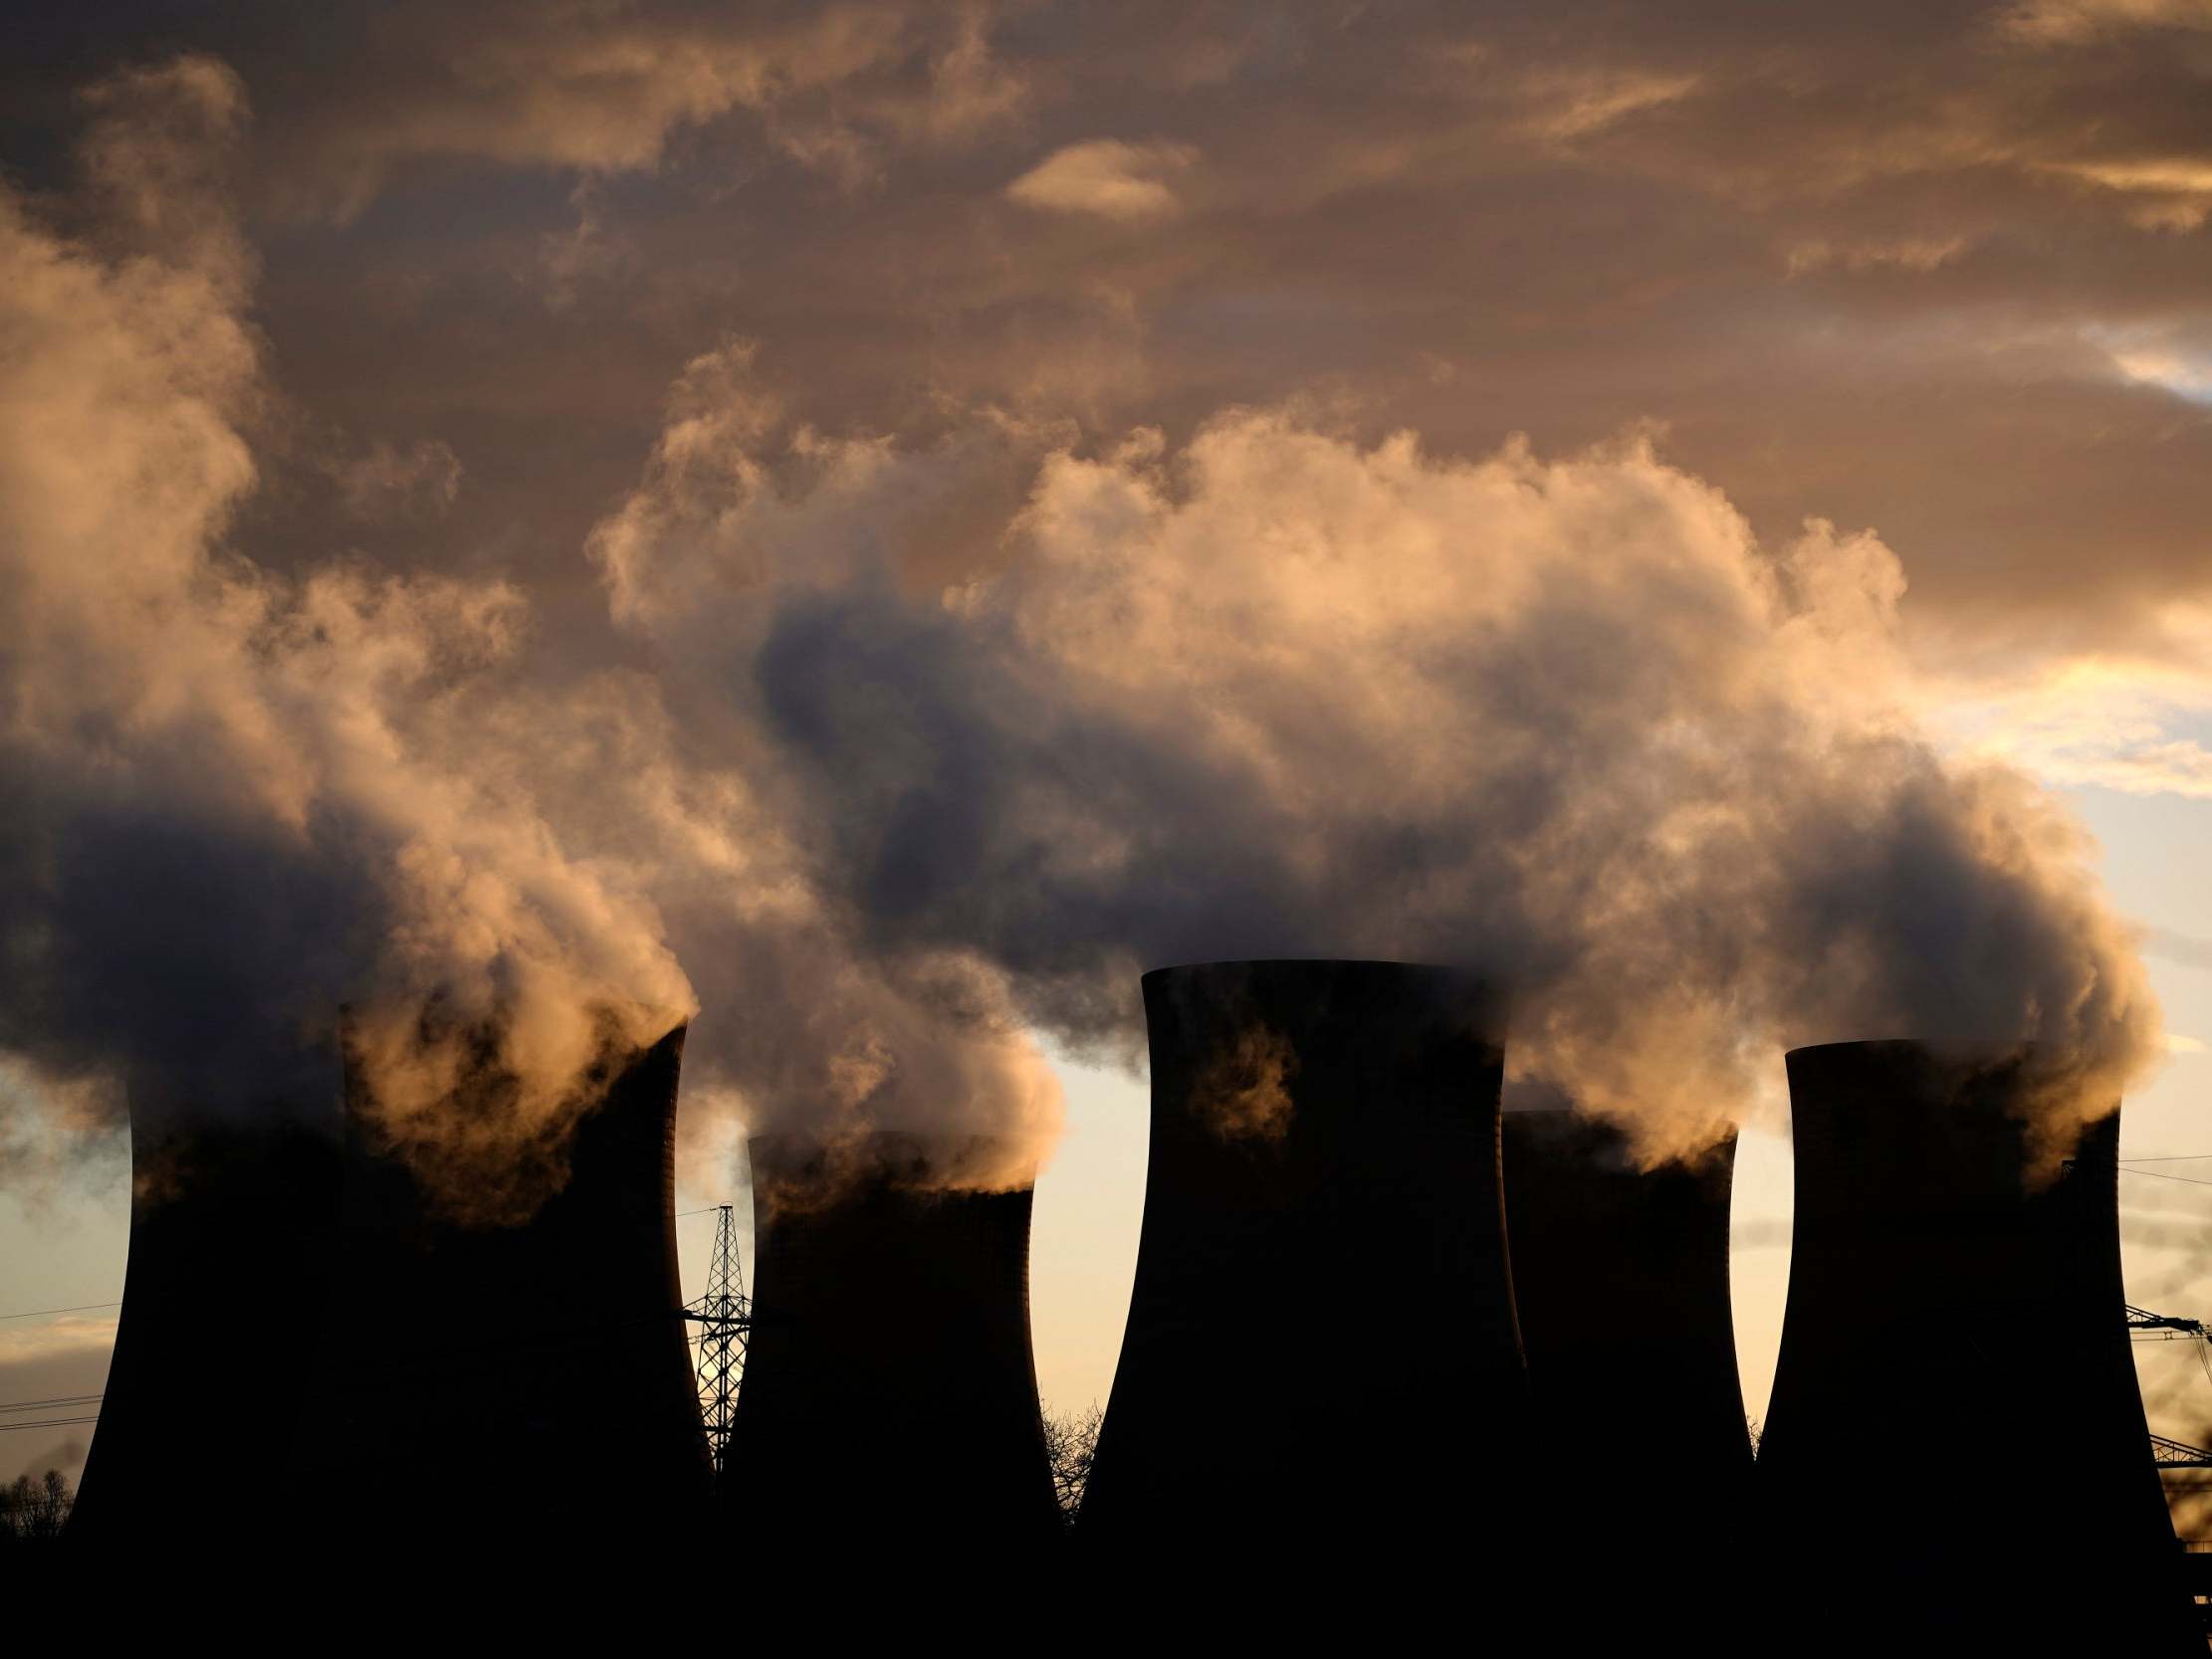 Carbon emissions fall at fastest rate in 30 years as electricity sector moves away from coal - The Independent